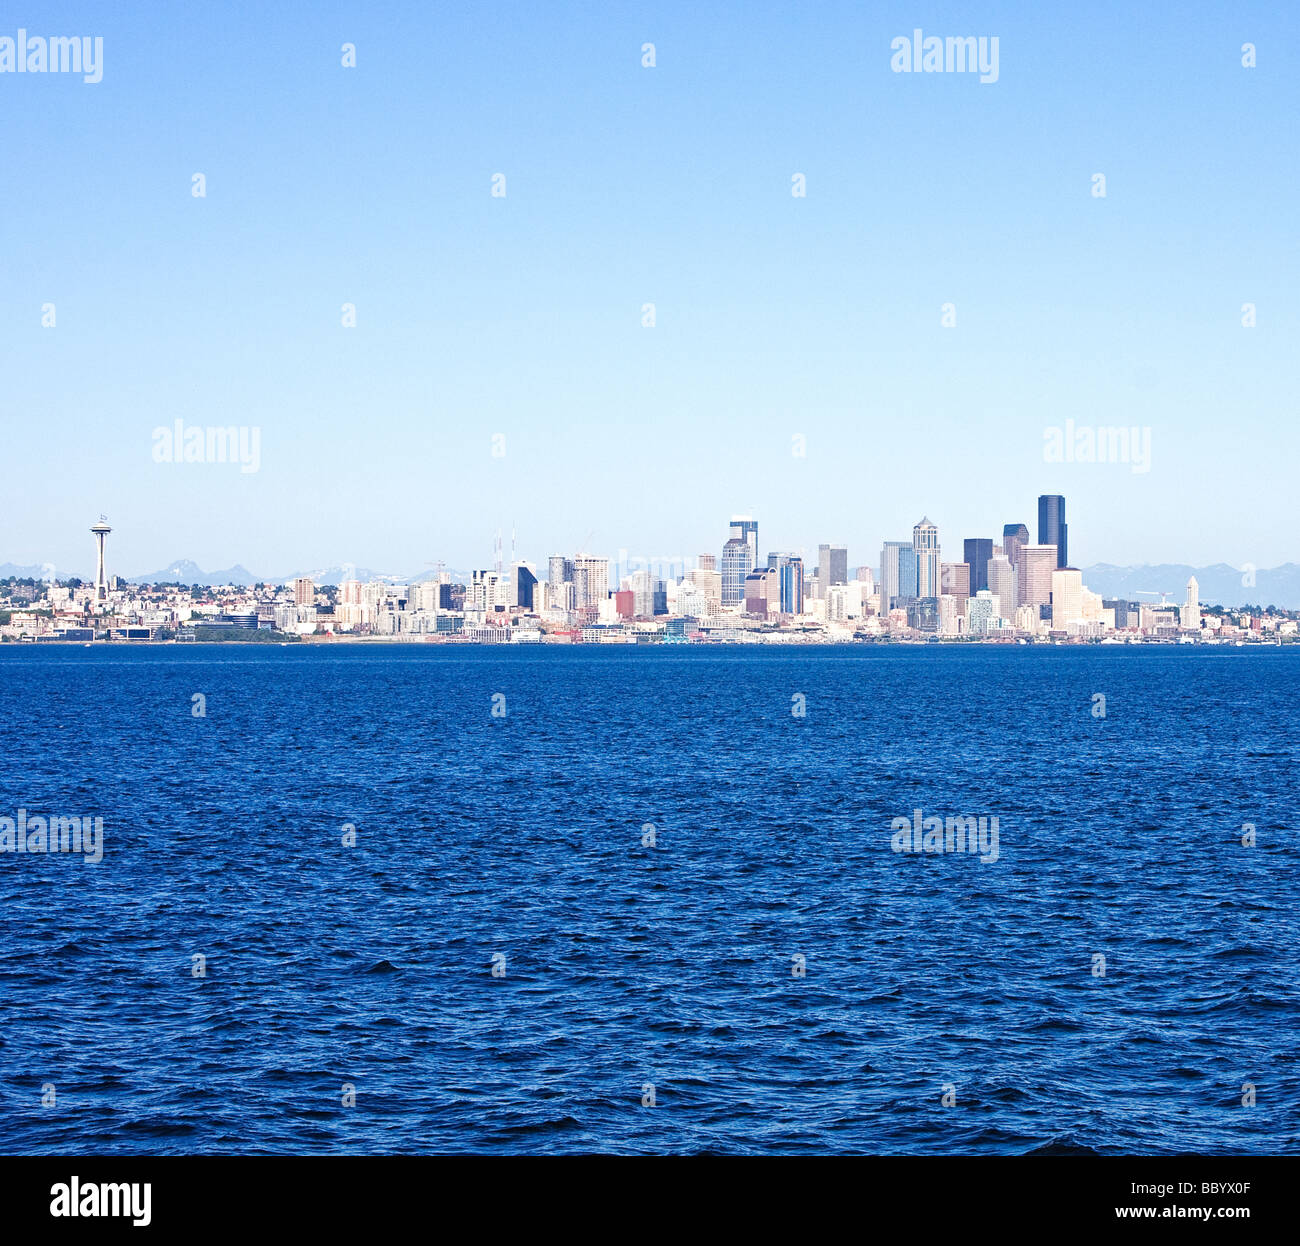 Seattle Skyline from Puget Sound Stock Photo